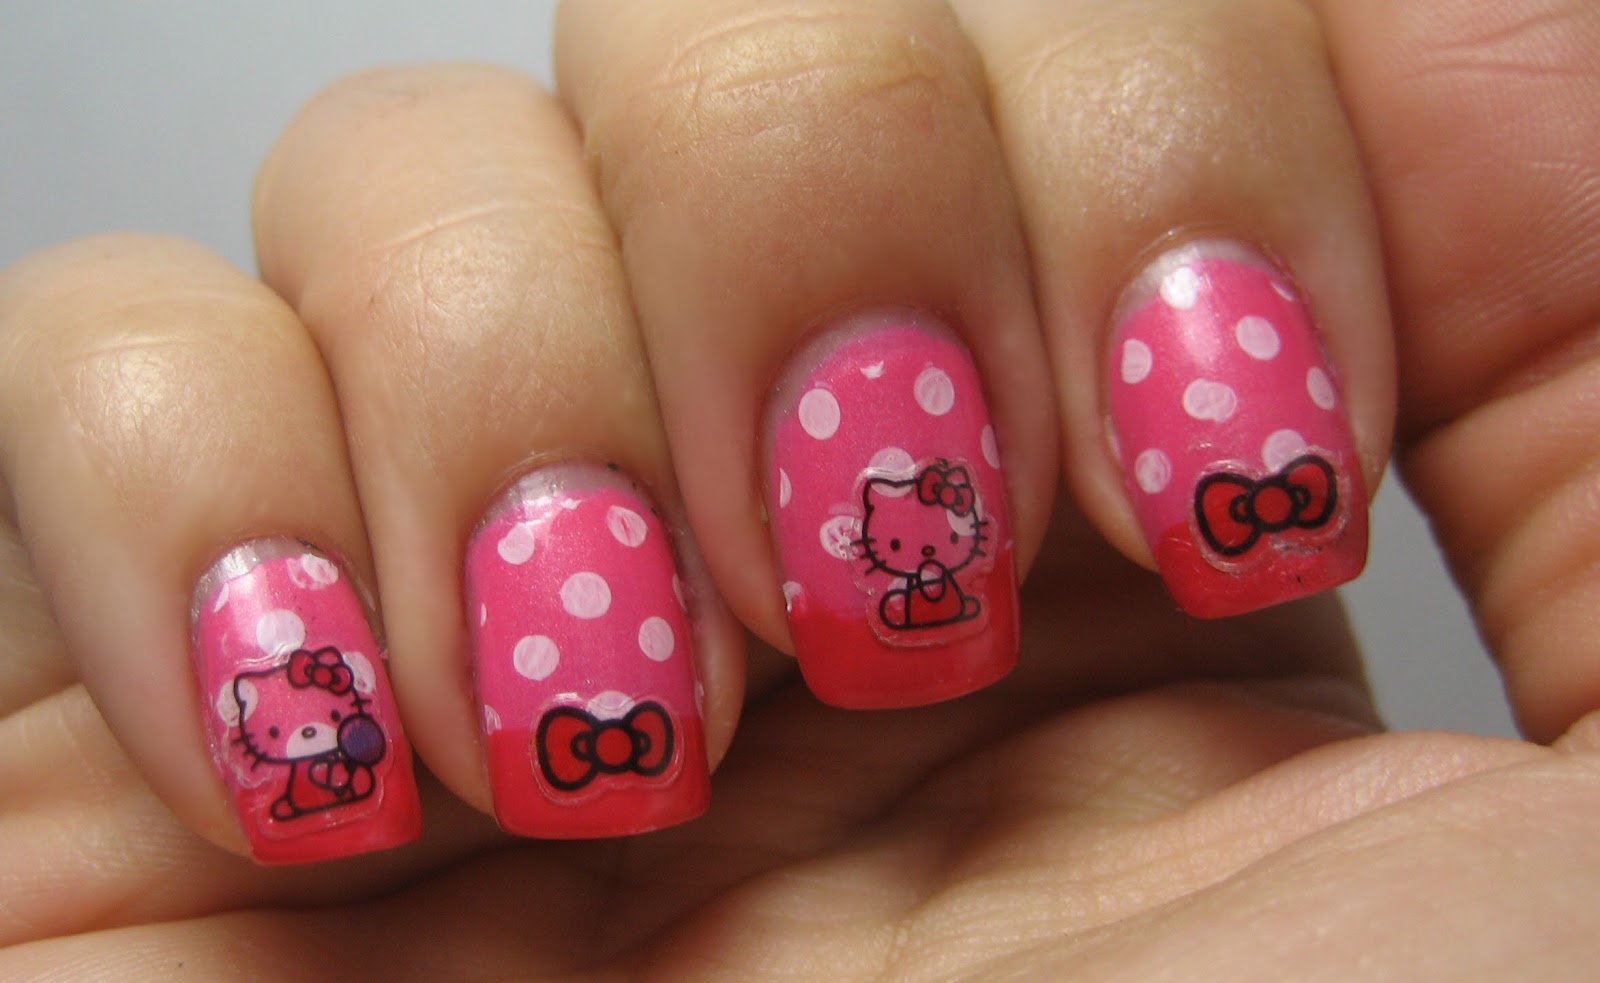 1. Hello Kitty Nail Art Designs for Cute and Adorable Nails - wide 1